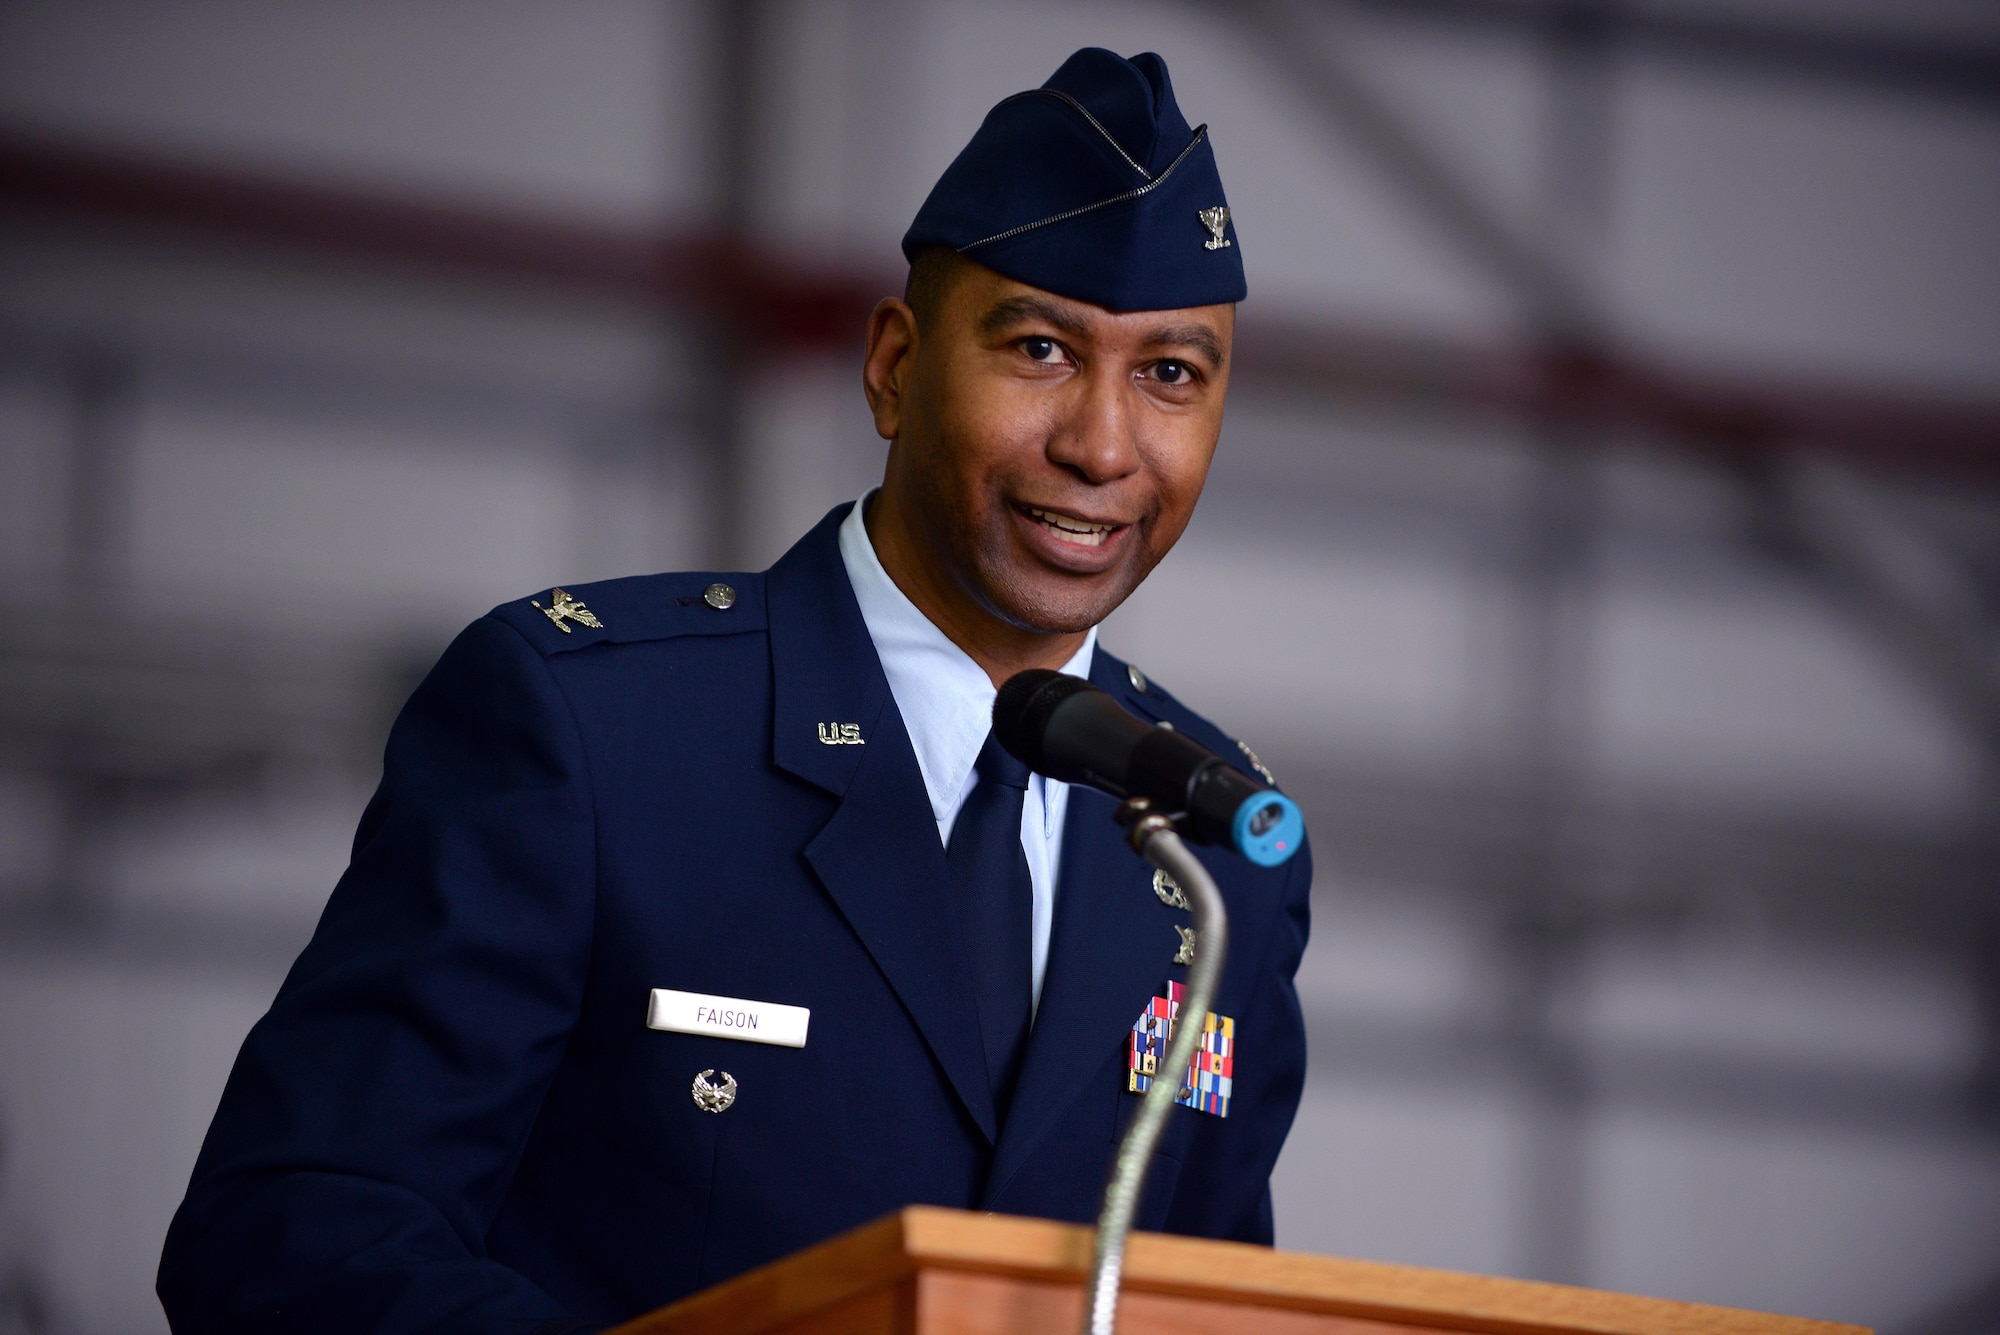 U.S. Air Force Col. Eric Faison, 352nd Special Operations Maintenance Group commander, speaks during the 352nd Special Operations Wing activation ceremony March 23, 2015, on RAF Mildenhall, England.  (U.S. Air Force photo by Senior Airman Christine Griffiths)